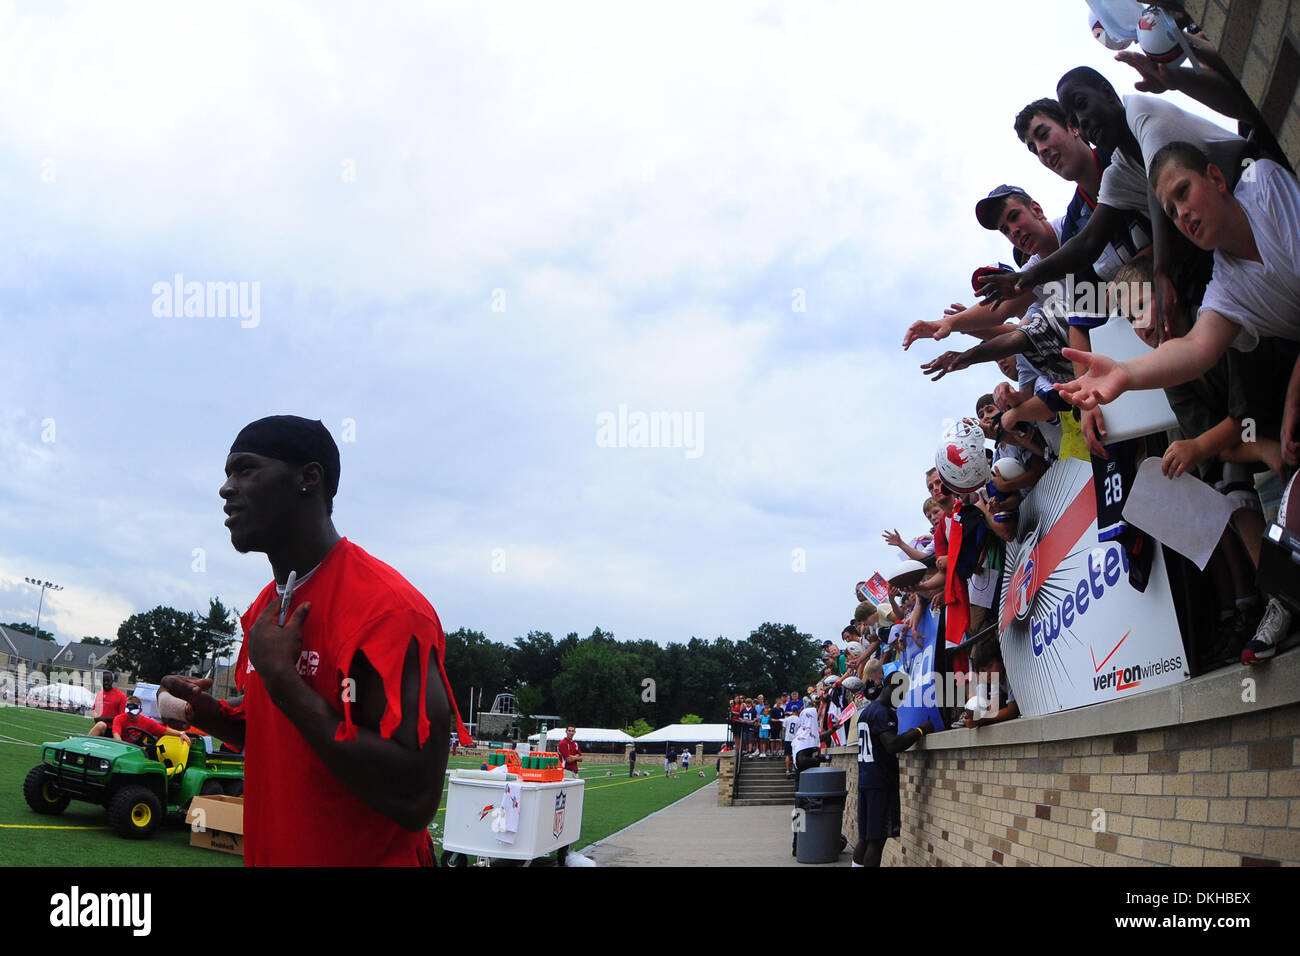 Buffalo Bills fans go crazy as cornerback Leodis McKelvin walks away after signing autographs following the team's final practice at St. John Fisher College in Rochester, NY on Wednesday. (Credit Image: © Michael Johnson/Southcreek Global/ZUMApress.com) Stock Photo